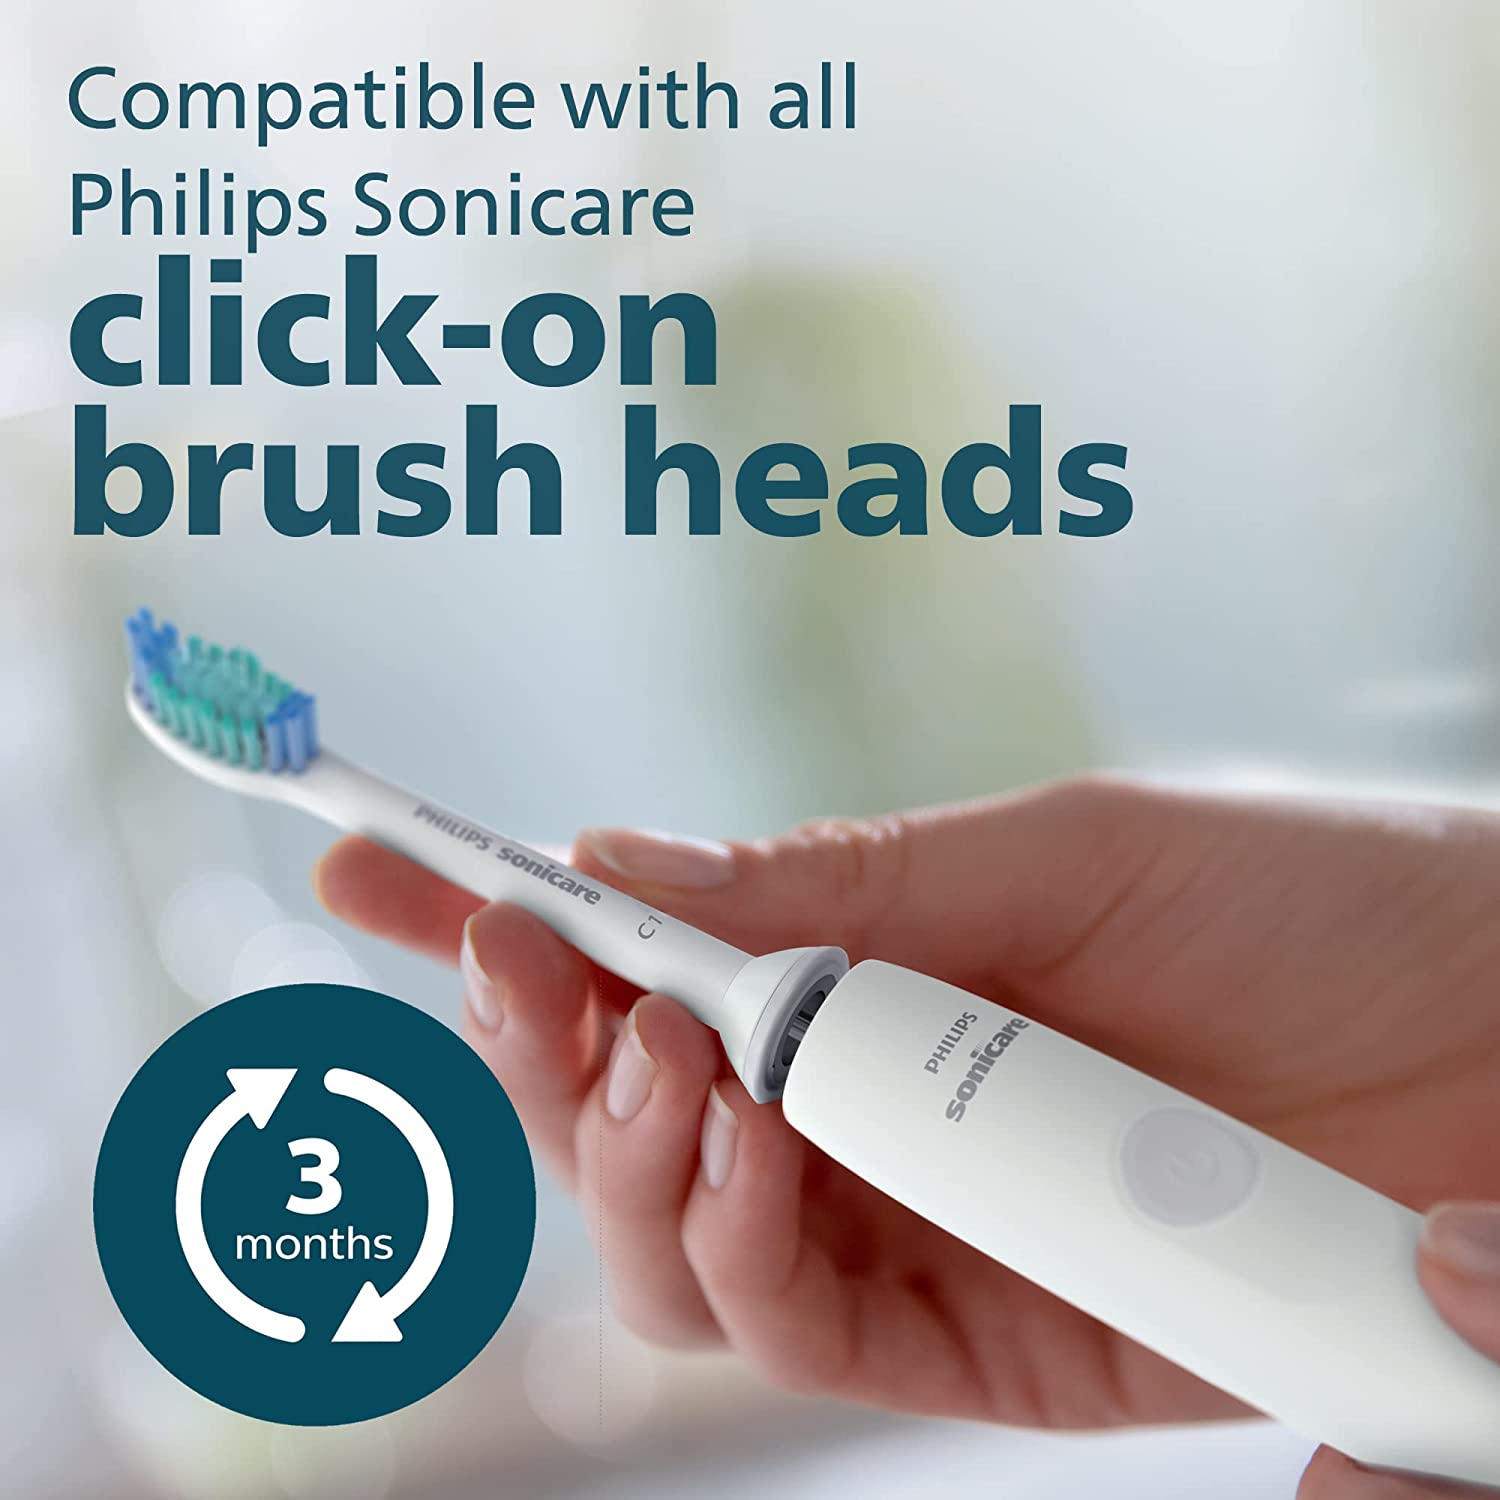 PHILIPS HX3641/02 SONICARE 1100 TOOTHBRUSH ELECTRIC WHITE